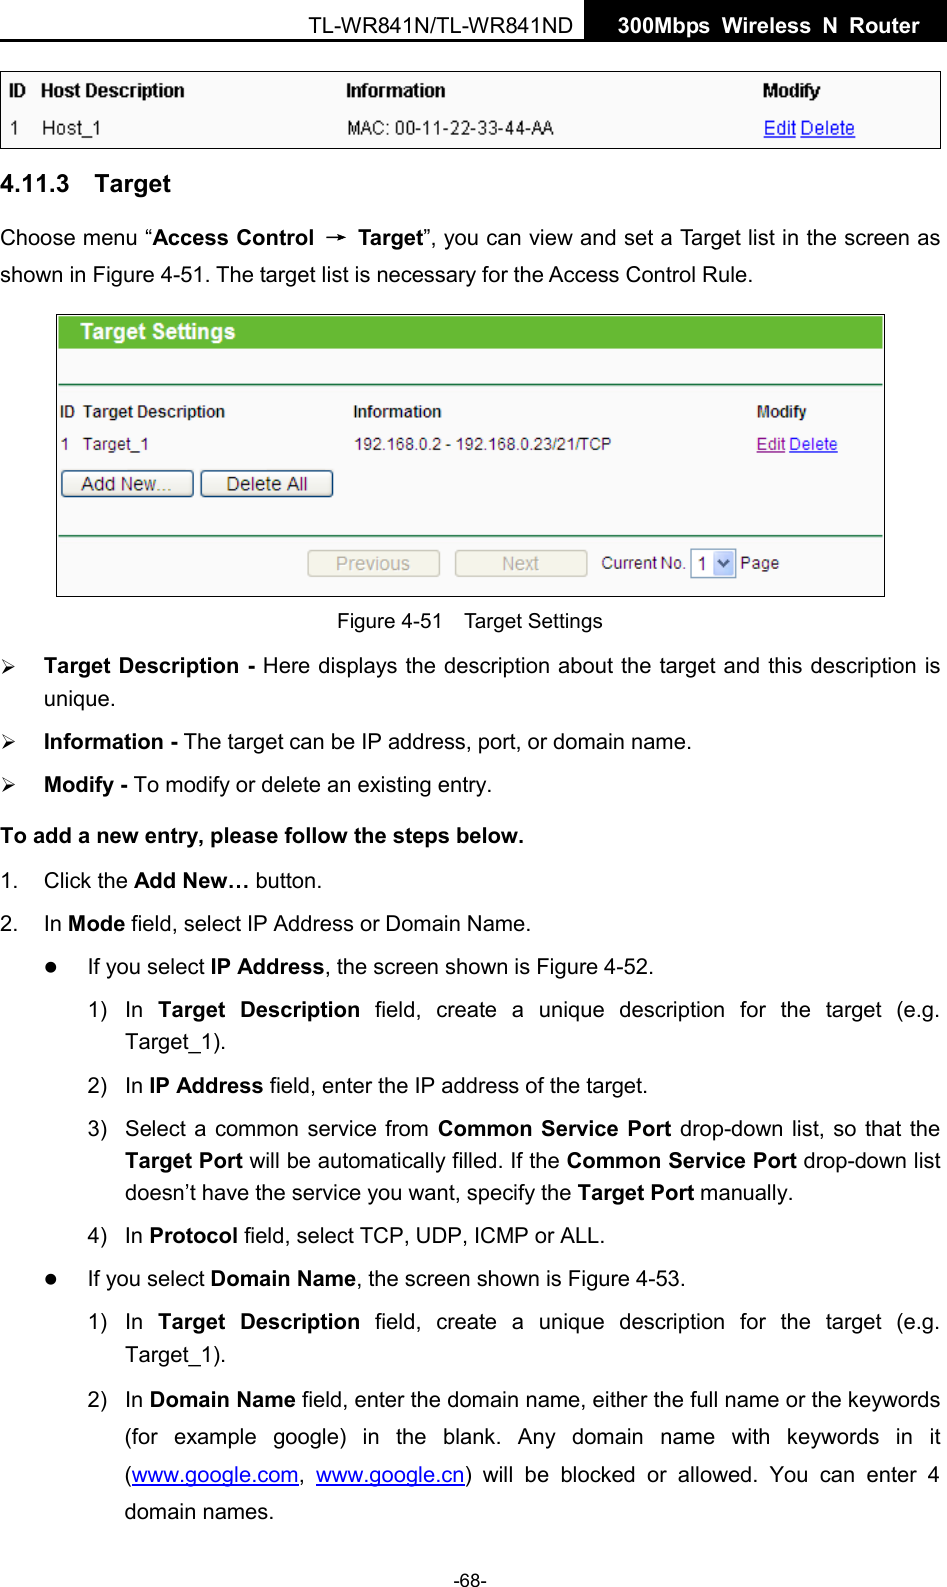  TL-WR841N/TL-WR841ND  300Mbps Wireless N  Router     4.11.3  Target Choose menu “Access Control → Target”, you can view and set a Target list in the screen as shown in Figure 4-51. The target list is necessary for the Access Control Rule.  Figure 4-51  Target Settings  Target Description - Here displays the description about the target and this description is unique.    Information - The target can be IP address, port, or domain name.    Modify - To modify or delete an existing entry.   To add a new entry, please follow the steps below. 1.  Click the Add New… button. 2. In Mode field, select IP Address or Domain Name.  If you select IP Address, the screen shown is Figure 4-52.   1) In  Target Description field, create a unique description for the target (e.g. Target_1). 2)  In IP Address field, enter the IP address of the target. 3) Select a common service from Common Service Port drop-down list, so that the Target Port will be automatically filled. If the Common Service Port drop-down list doesn’t have the service you want, specify the Target Port manually. 4)  In Protocol field, select TCP, UDP, ICMP or ALL.   If you select Domain Name, the screen shown is Figure 4-53. 1) In  Target Description field, create a unique description for the target (e.g. Target_1). 2)  In Domain Name field, enter the domain name, either the full name or the keywords (for example google) in the blank. Any domain name with keywords in it (www.google.com,  www.google.cn) will be blocked or allowed. You can enter 4 domain names. -68- 